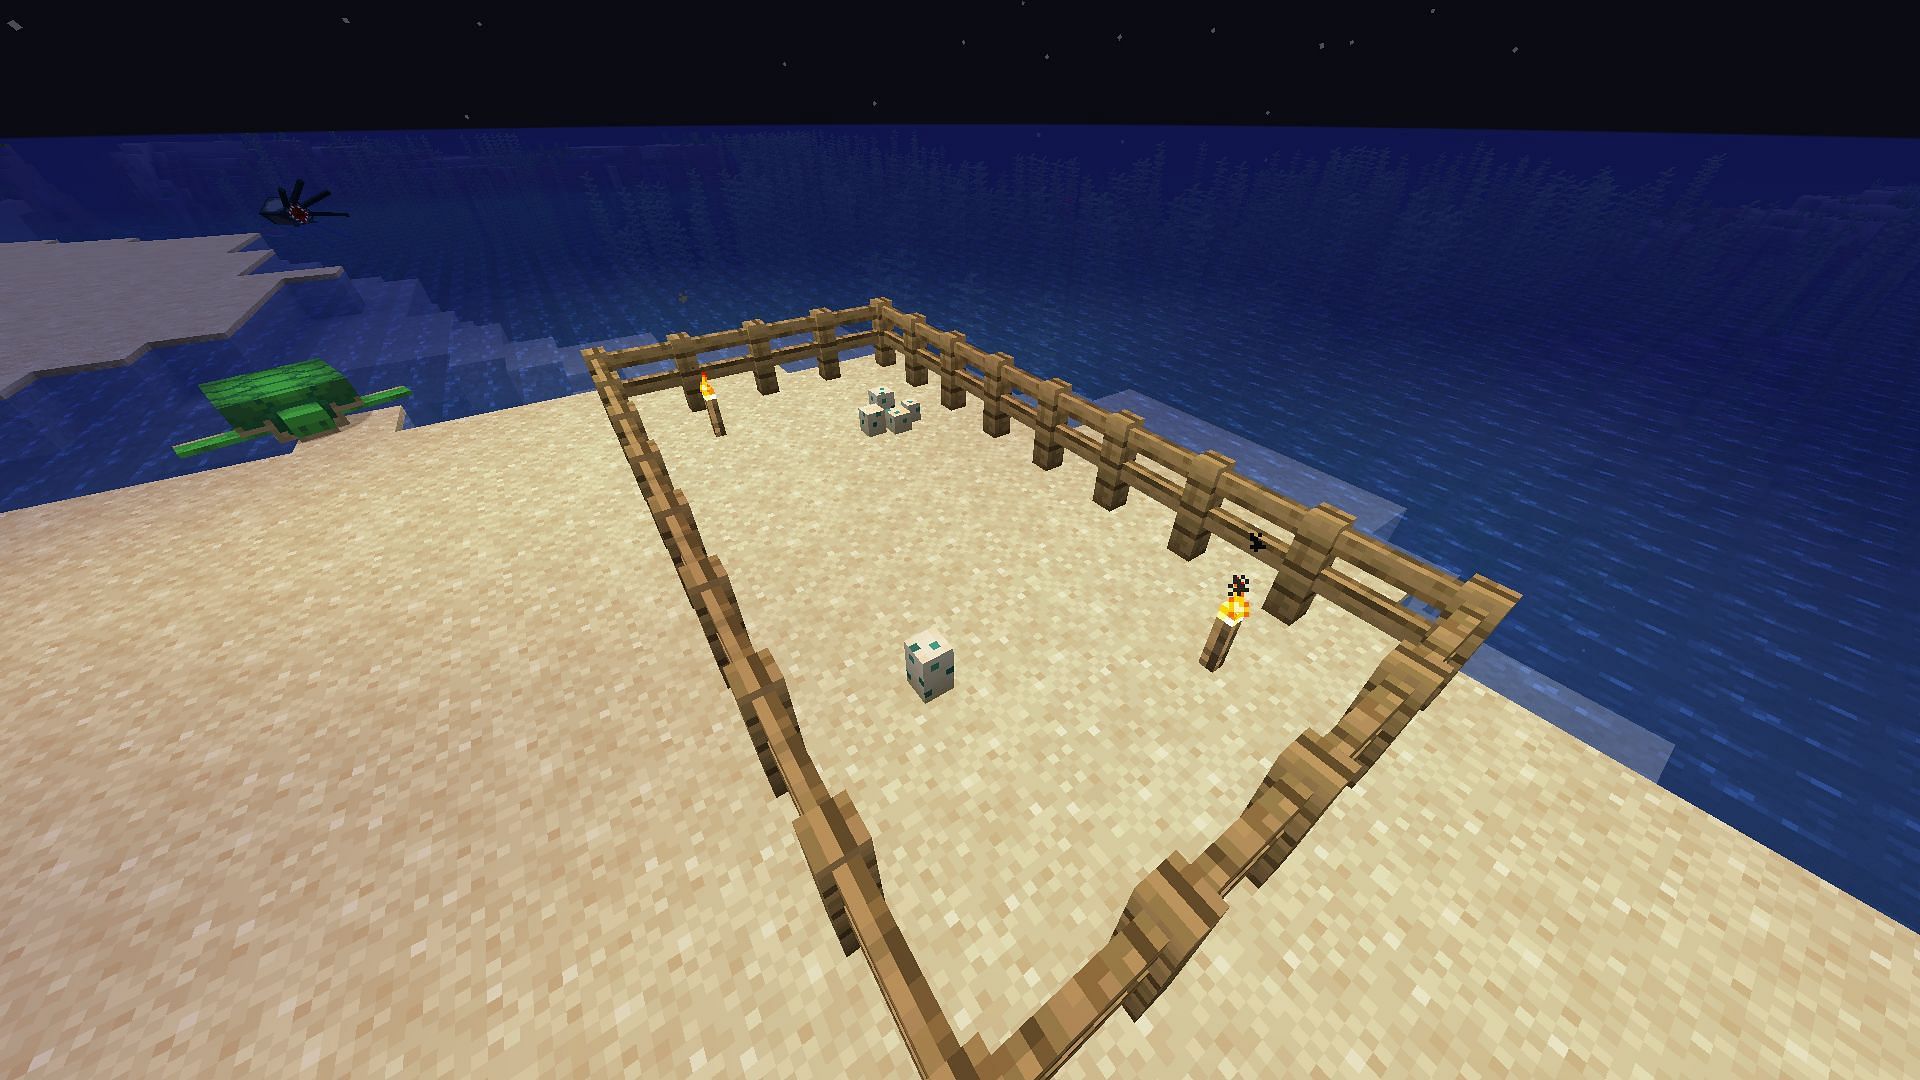 The best way to protect the eggs is by creating a fence and lighting up the area in Minecraft (Image via Mojang)